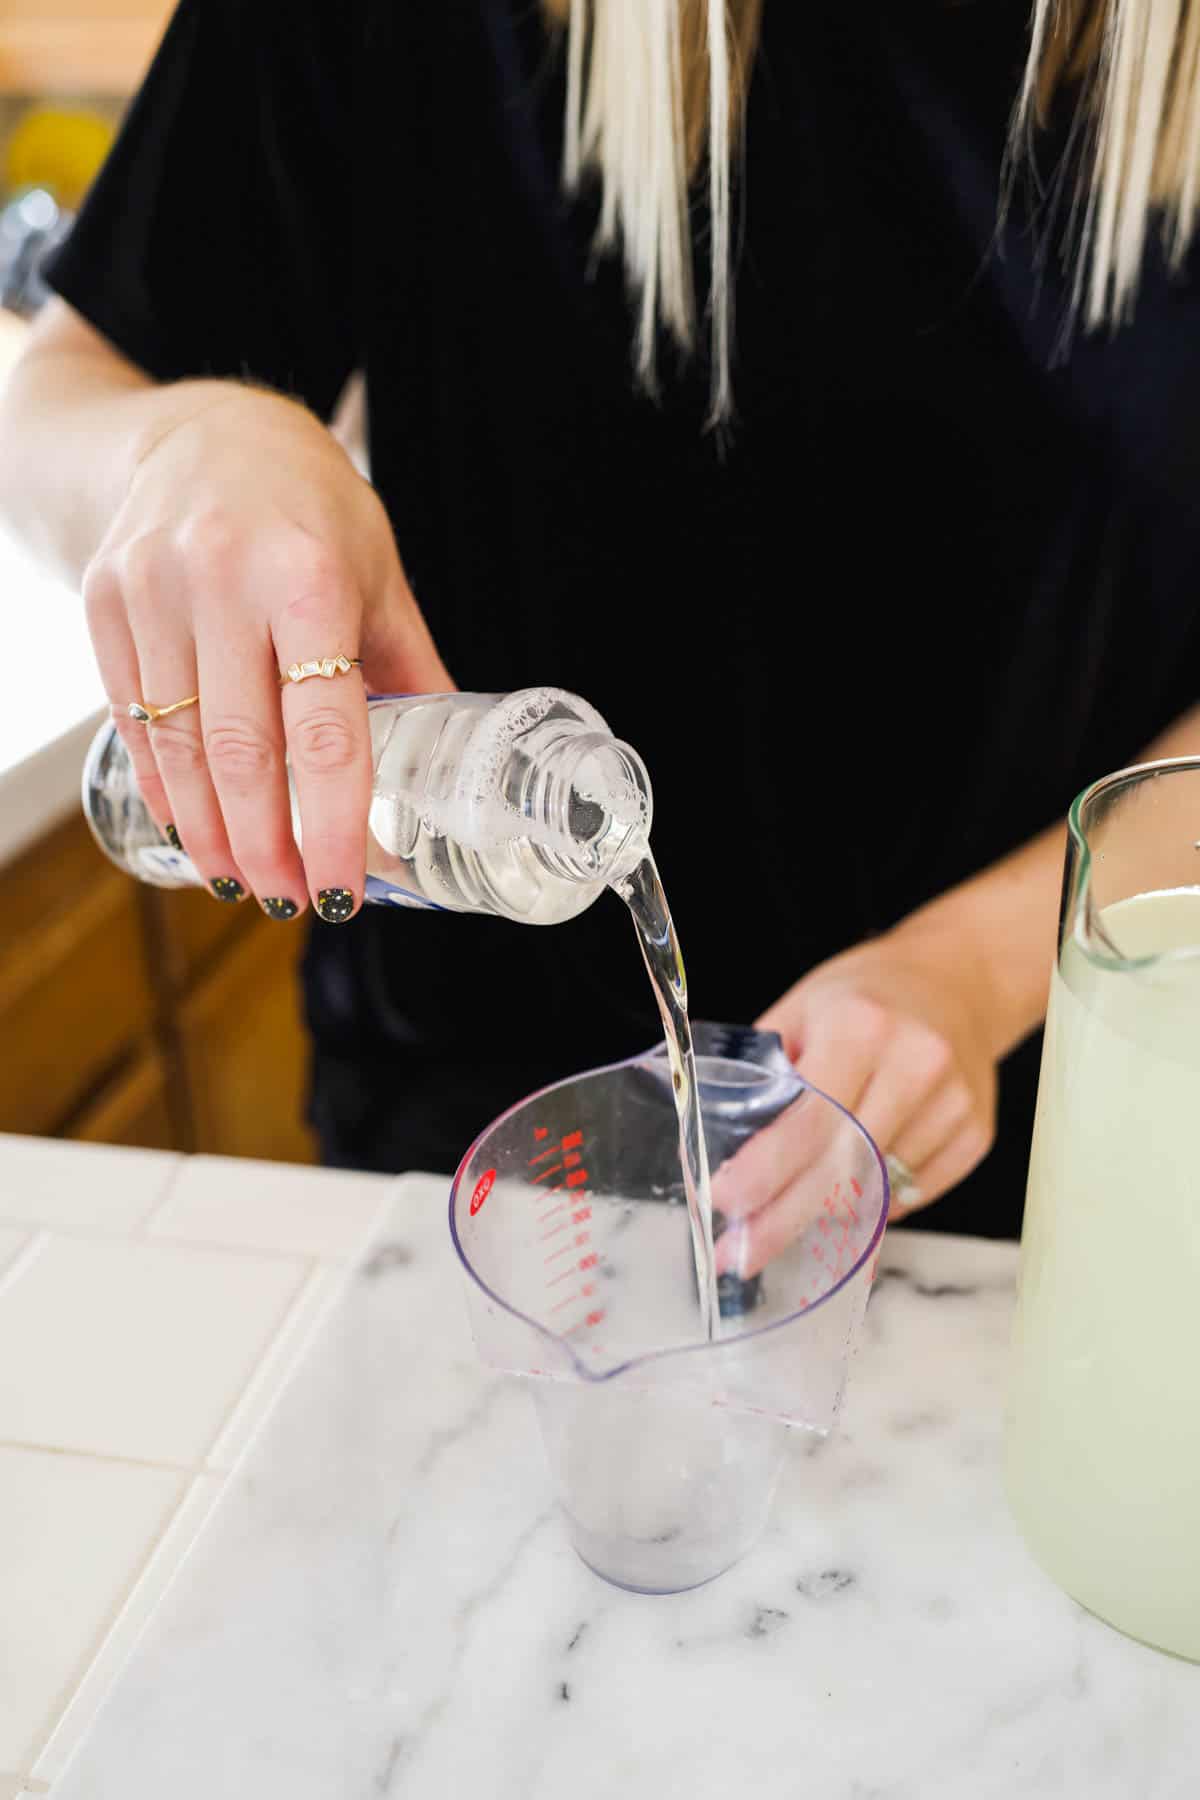 Woman measuring simple syrup for a large batch of margaritas.